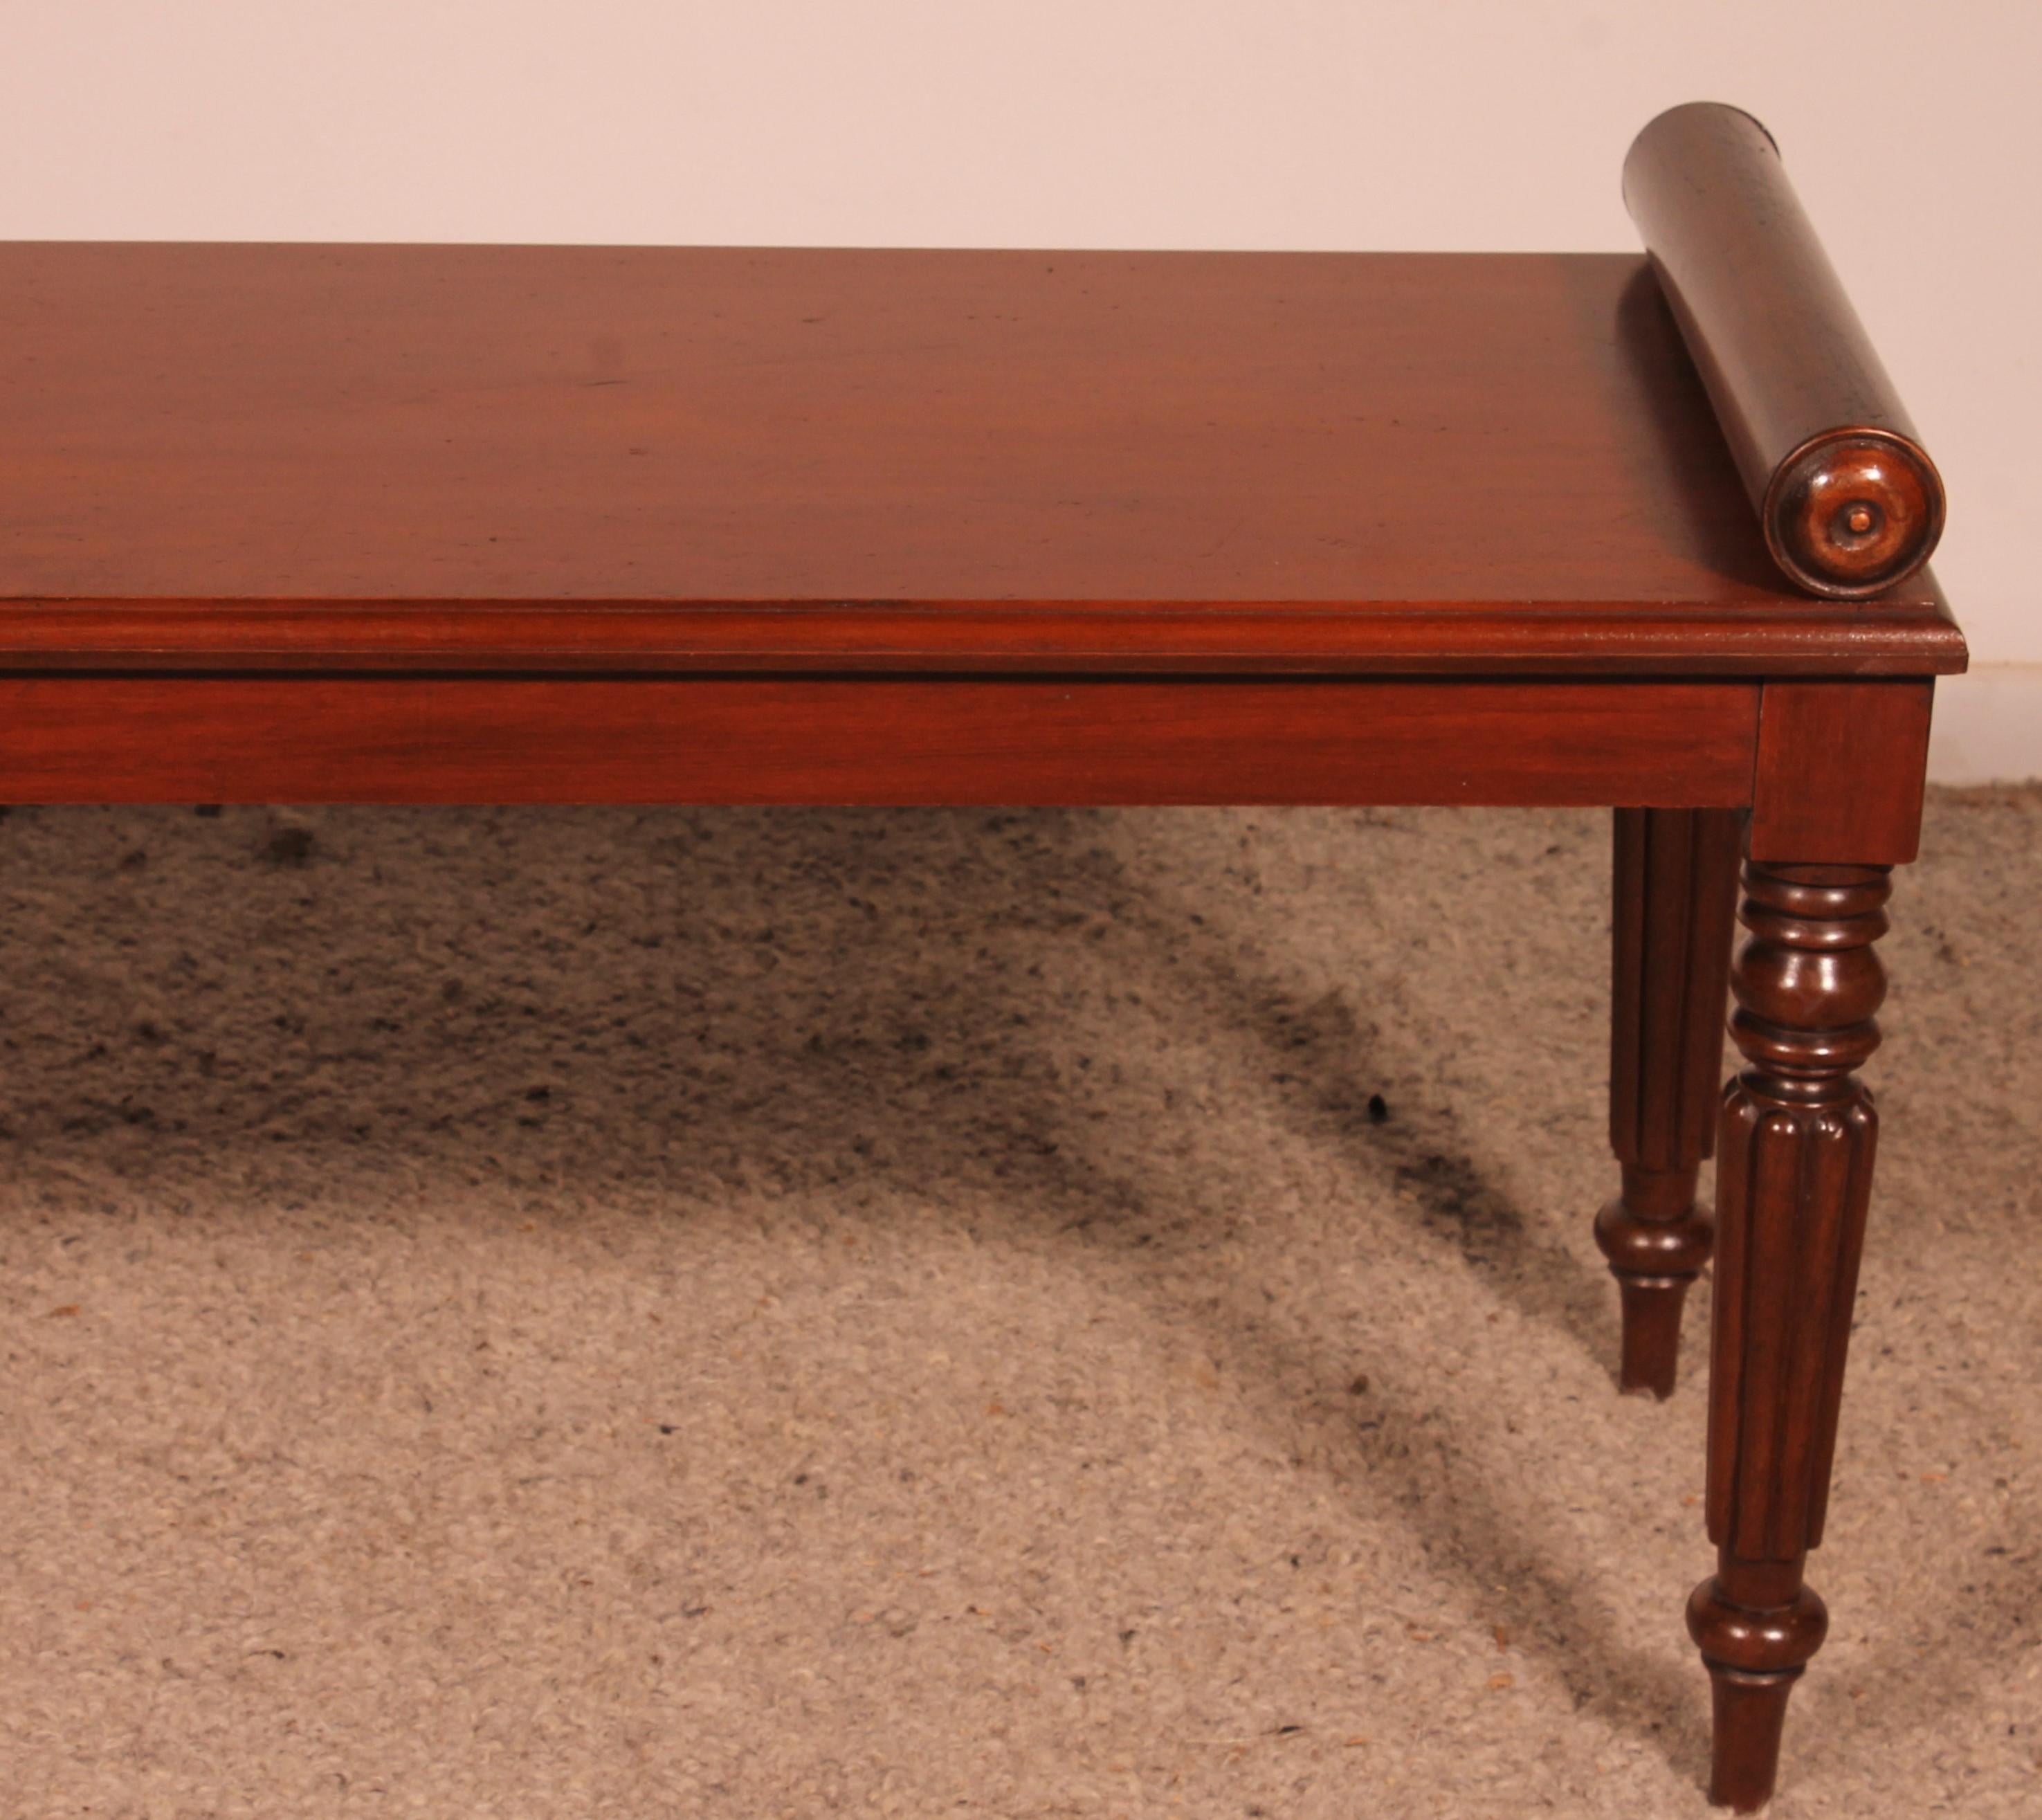 lovely solid mahogany bench from the first part of the 19th century also called hall bench 

Very beautiful little model which rest on a superb turning with a beautiful decoration on the top called bolster ends
seat height 41cm

In superb condition